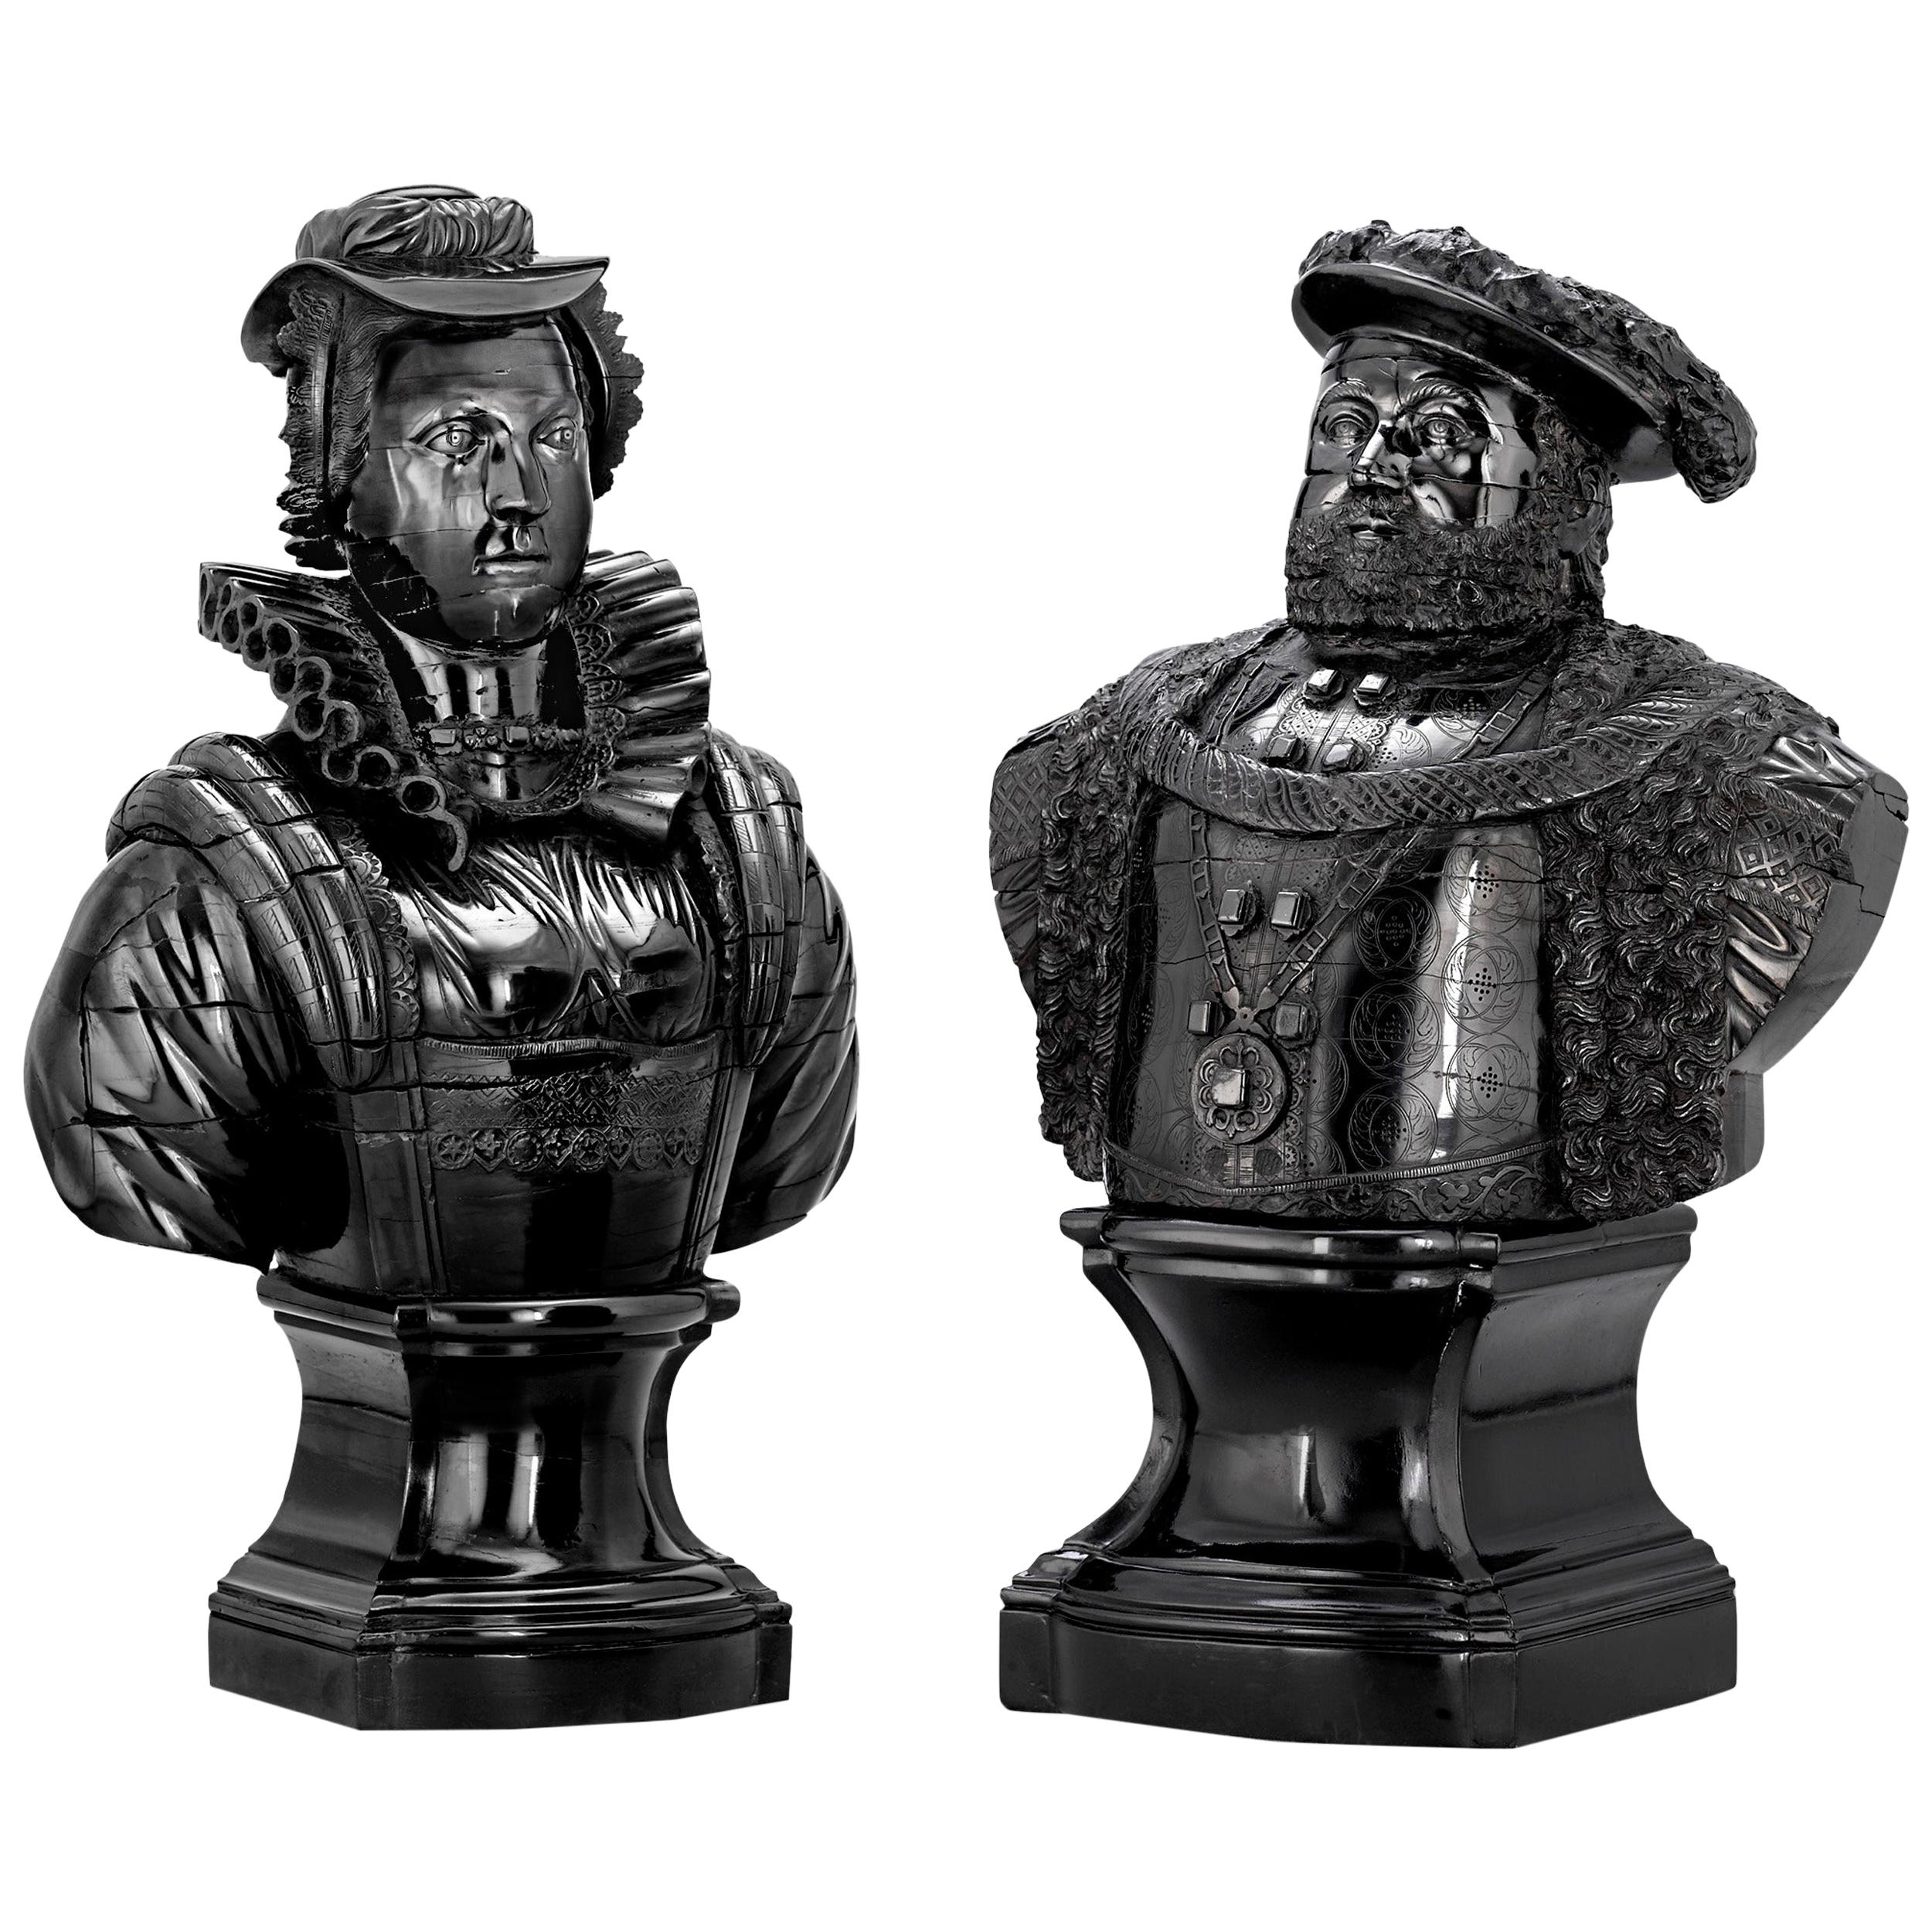 Cannel Coal Busts of Henry VIII and Mary, Queen of Scots